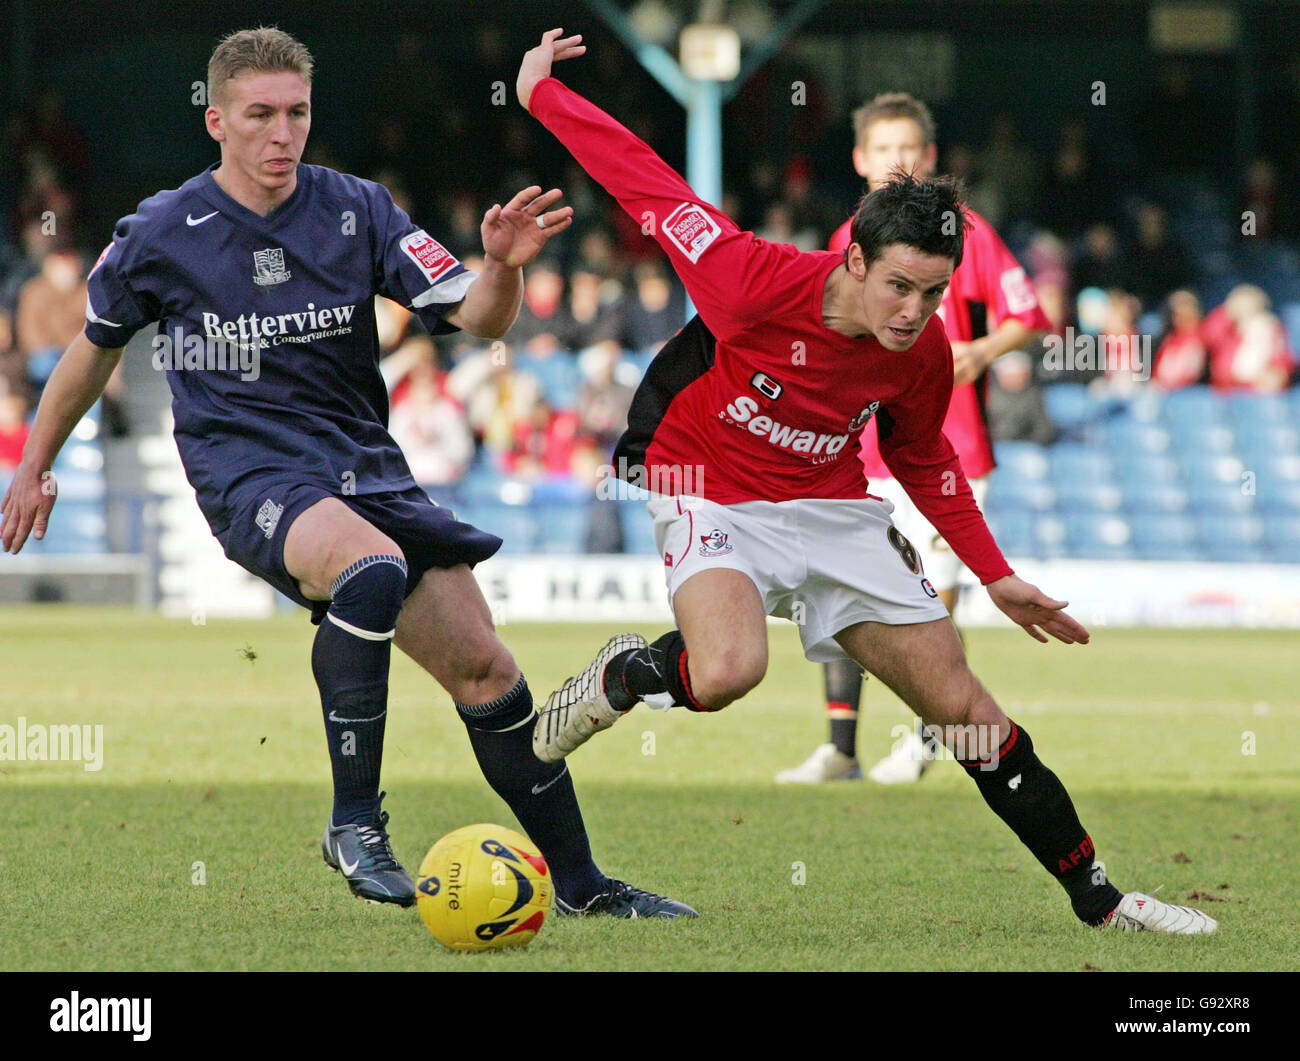 Southend's Freddy Eastwood (L) Bournmouth's Brian Stock battle for the ball during the Coca Cola League One match at Roots Hall, Southend-On-Sea, Saturday December 31, 2005. PRESS ASSOCIATION Photo. Photo credit should read: Mark Lees/PA. NO UNOFFICIAL CLUB WEBSITE USE. Stock Photo